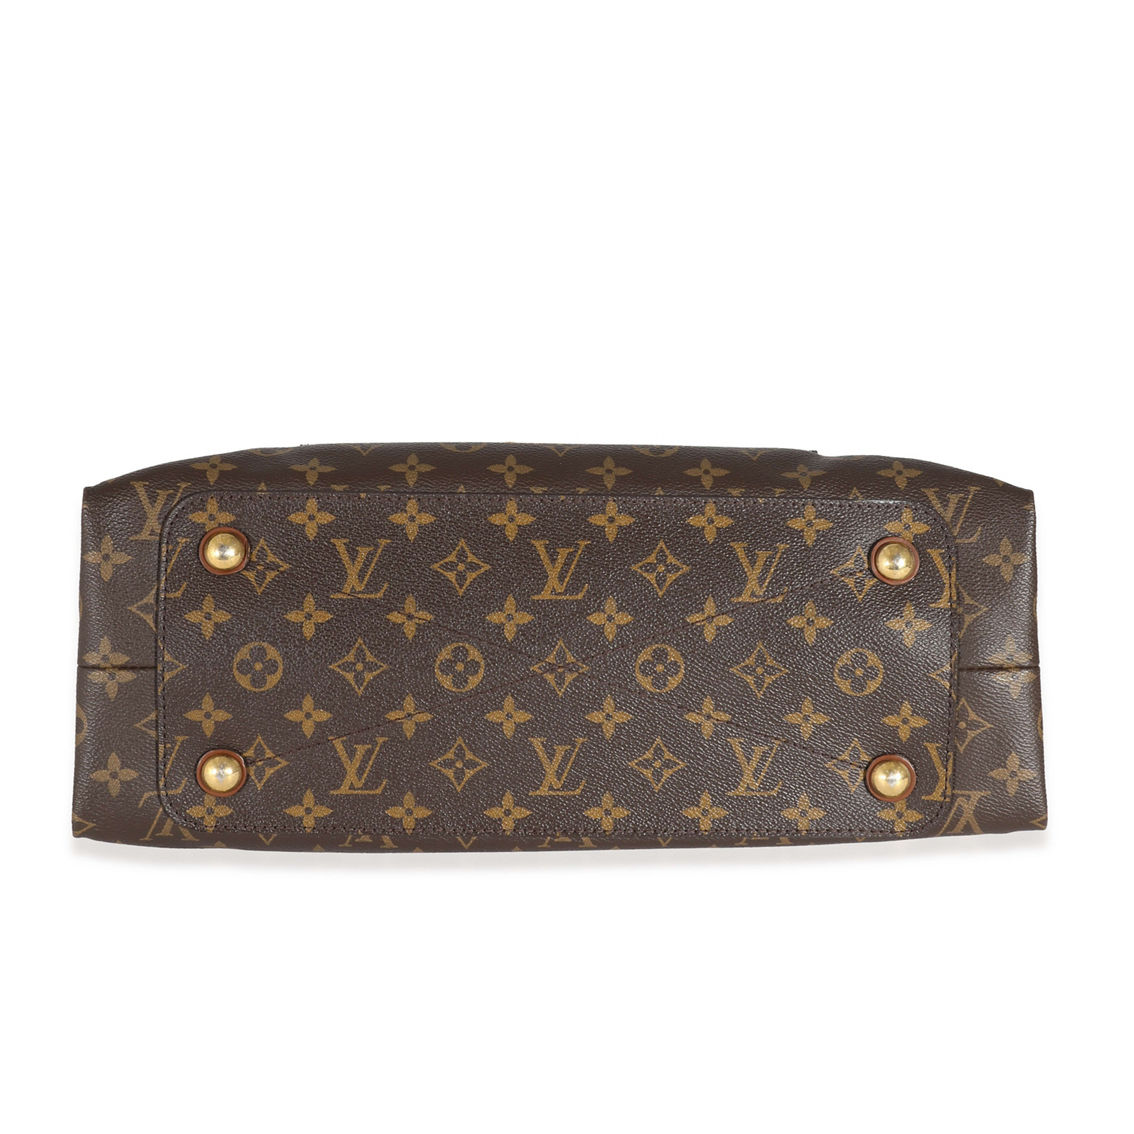 Louis Vuitton Olympe Pre-Owned - Image 3 of 5